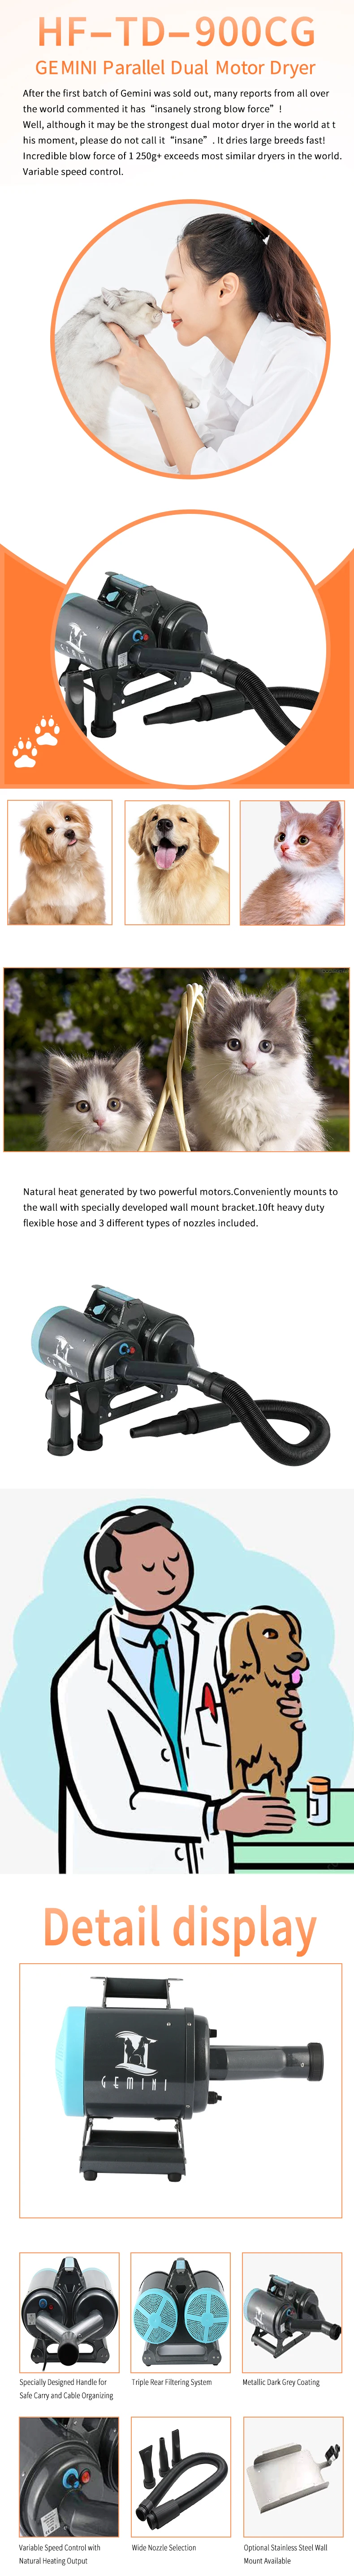 High Quality Battery-Powered Pet Hair Blower Dryer Machine Sustainable Feature for Small Animals Including Dogs and Pets